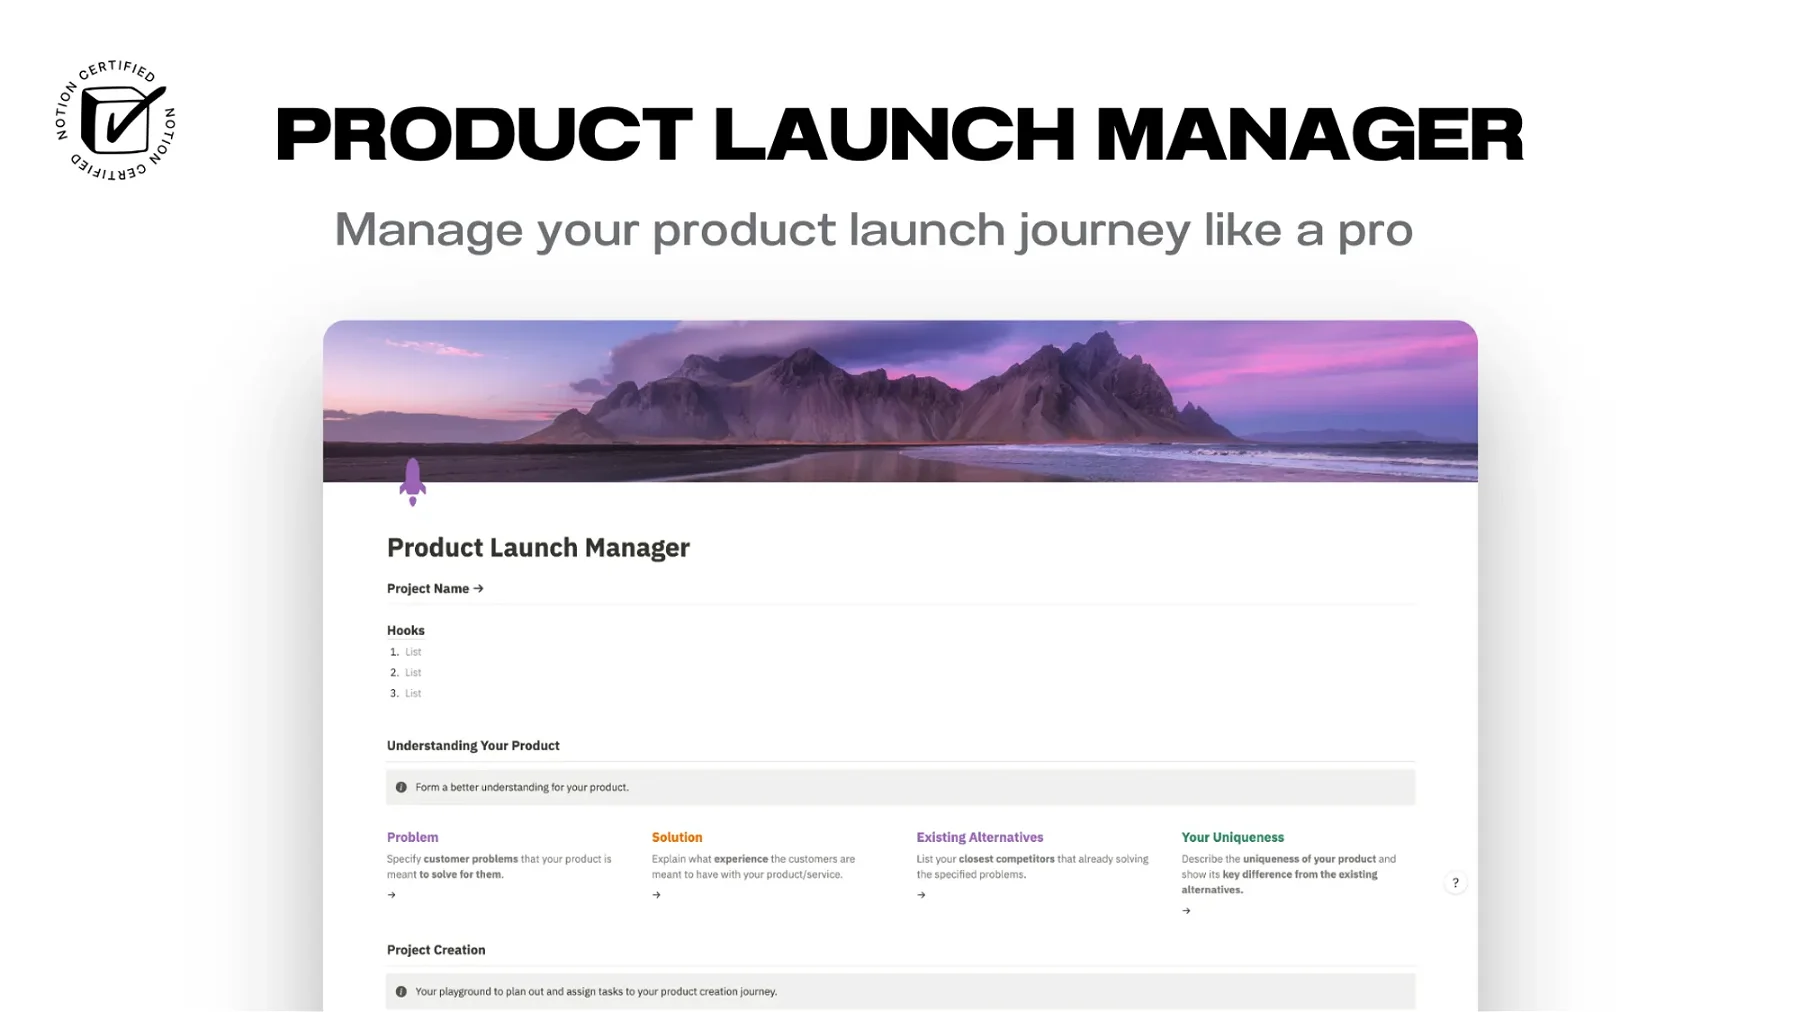 Product Launch Manager (v1)